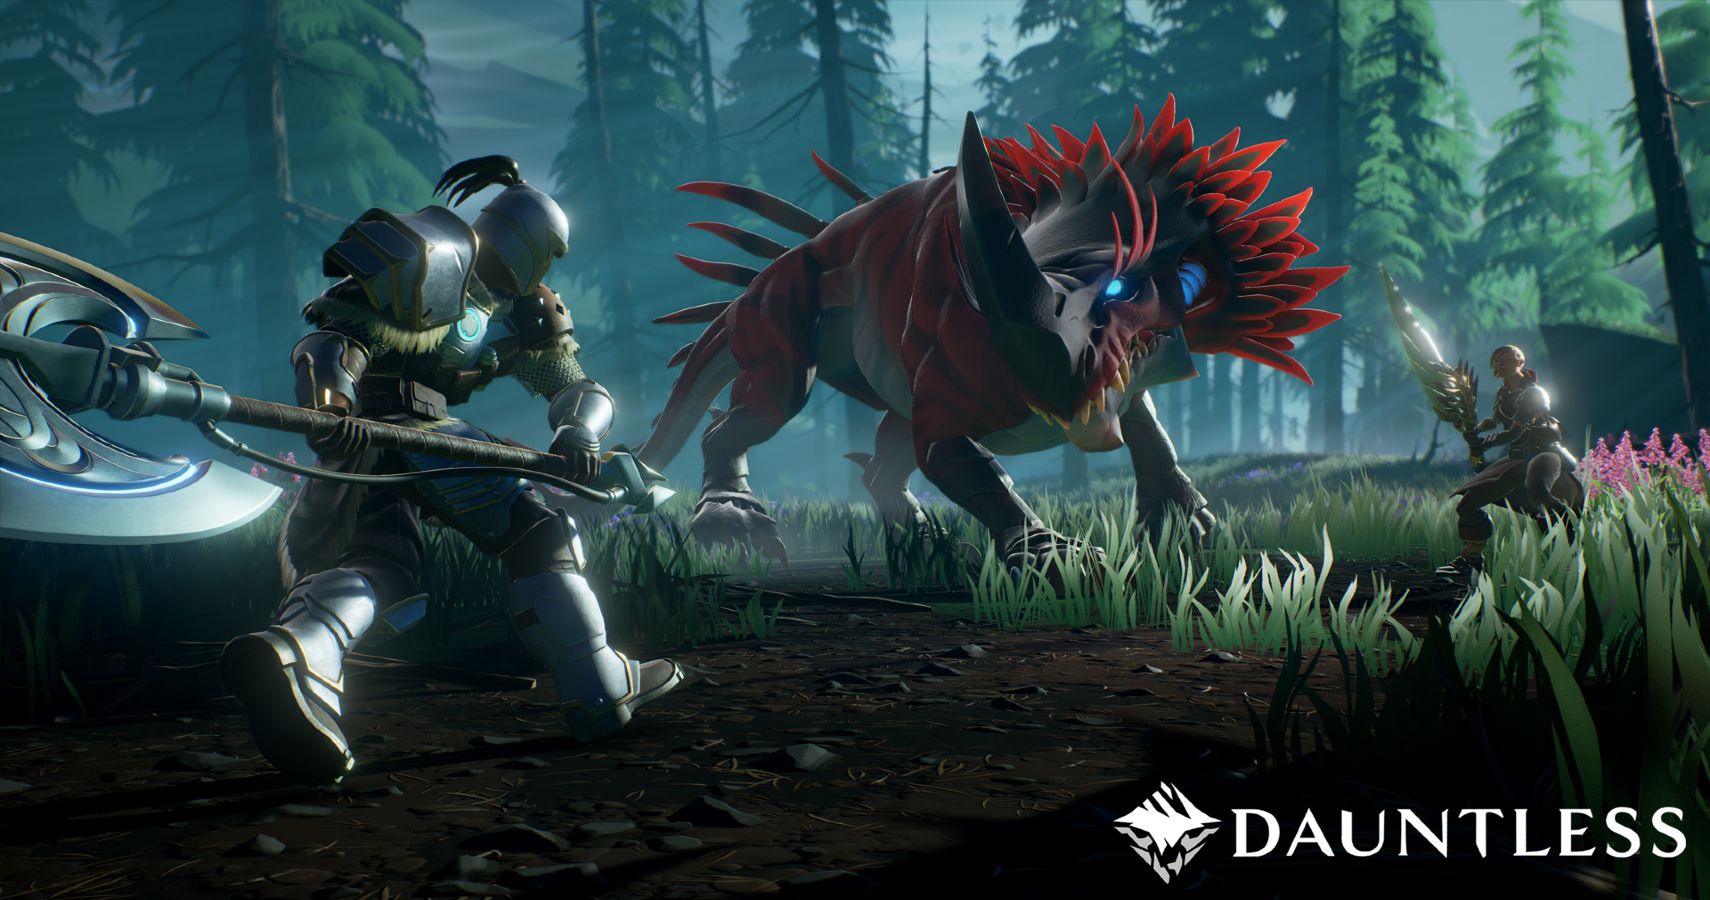 A Dauntless Retrospective From Early Concept To Current Form